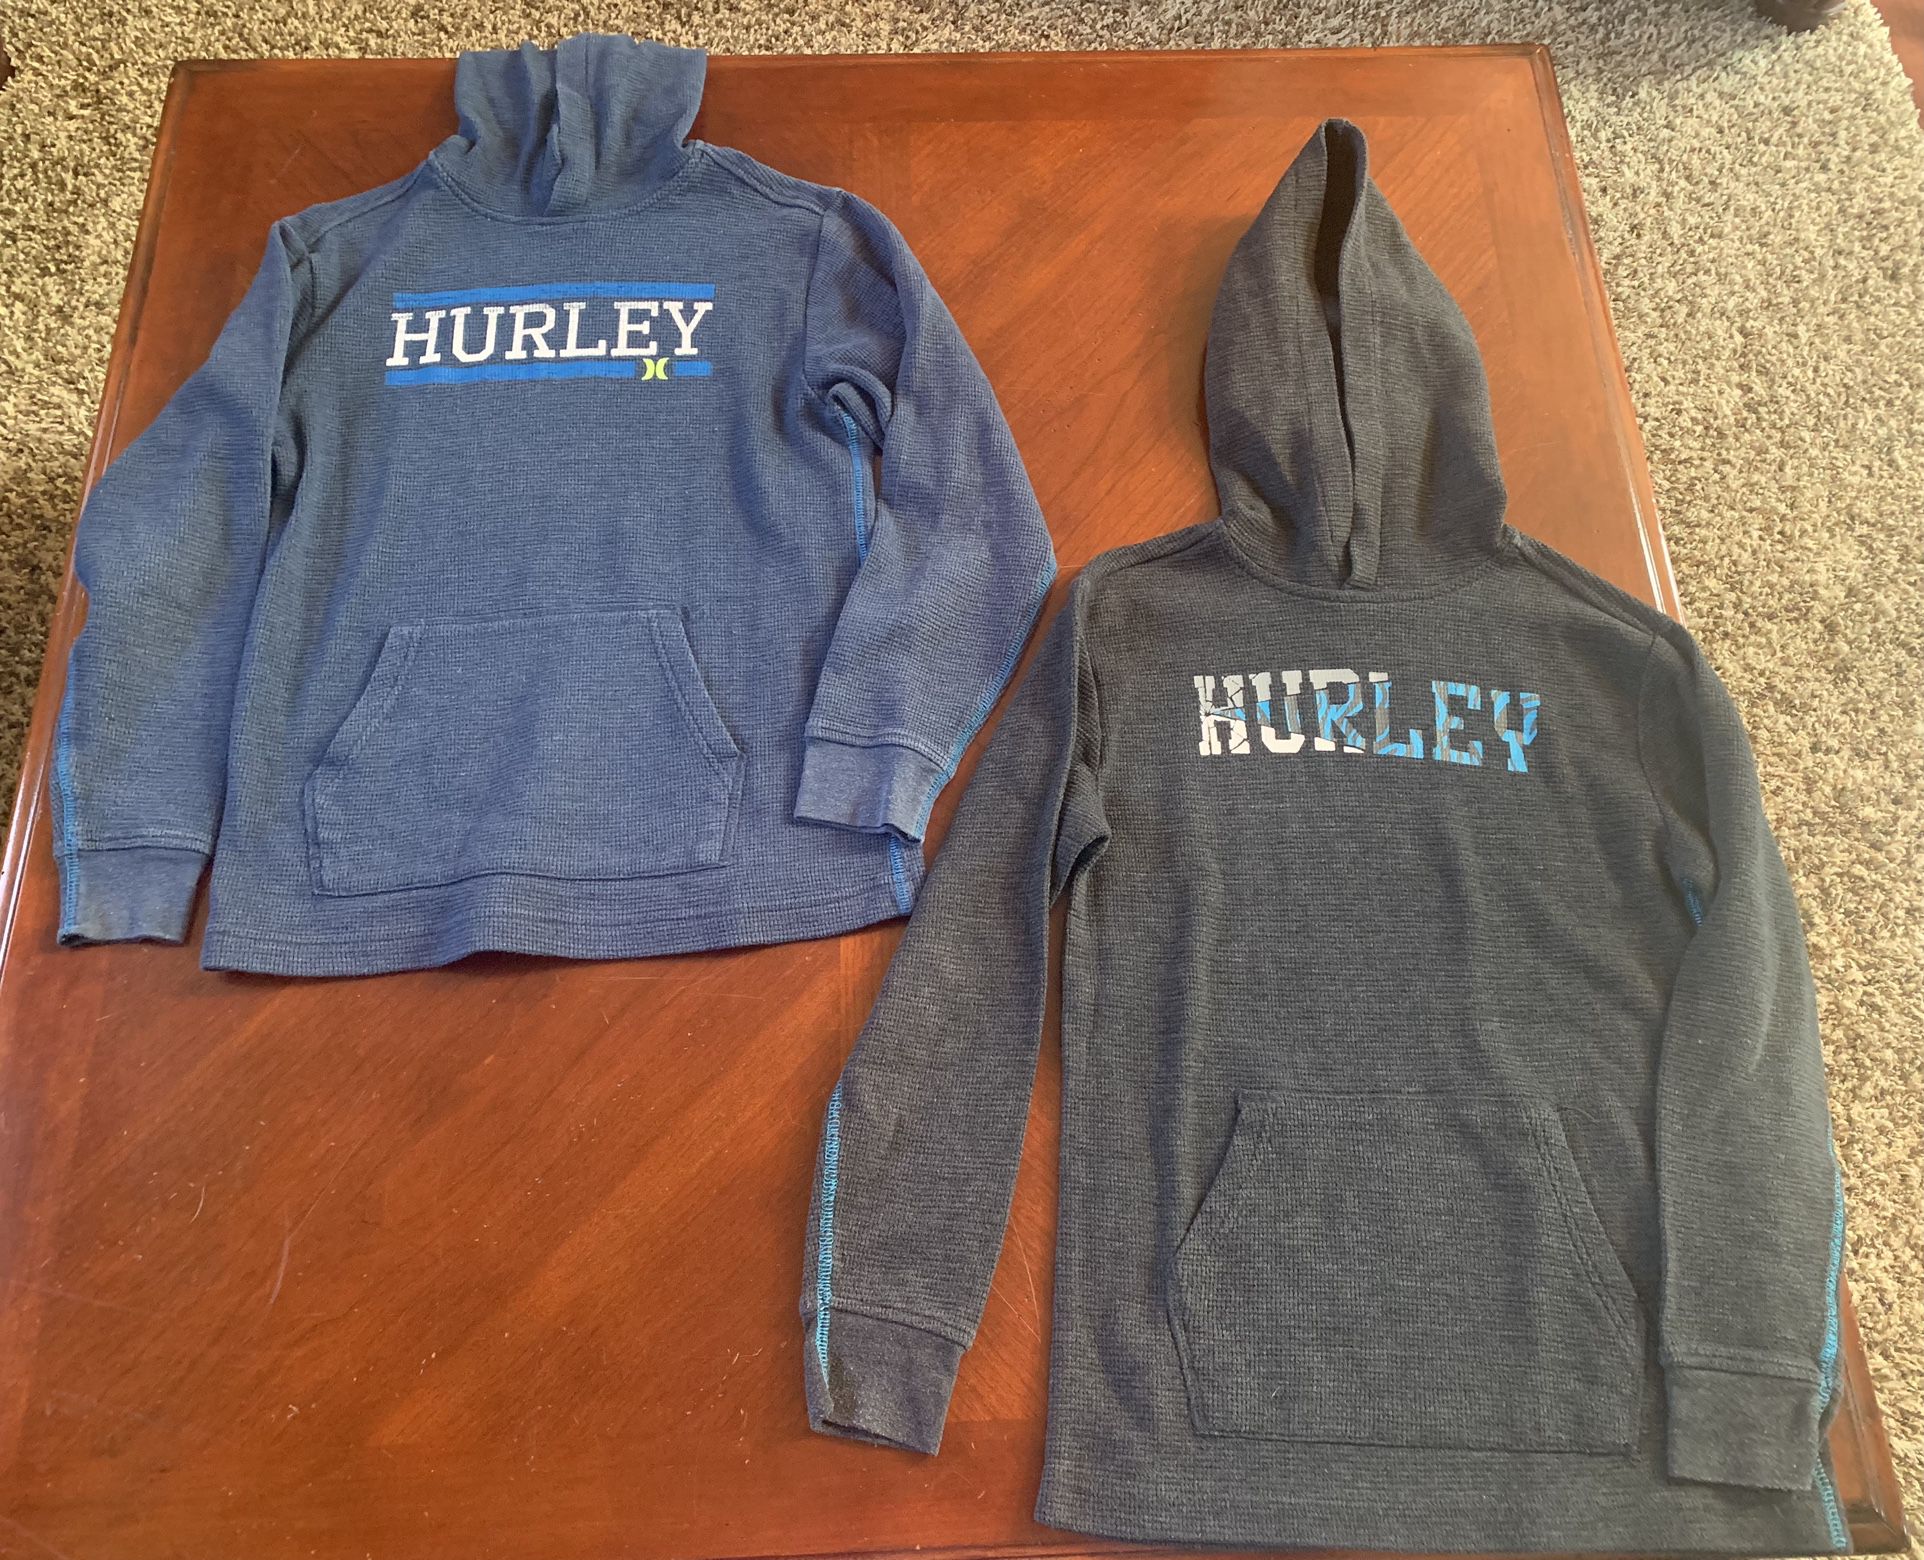 🏃🏻‍♂️Kids Size 8 Boys Thermal Material Hooded Shirts by Hurley  $8 EACH or BOTH for $15 Both are in like new condition from smoke and pet free home.